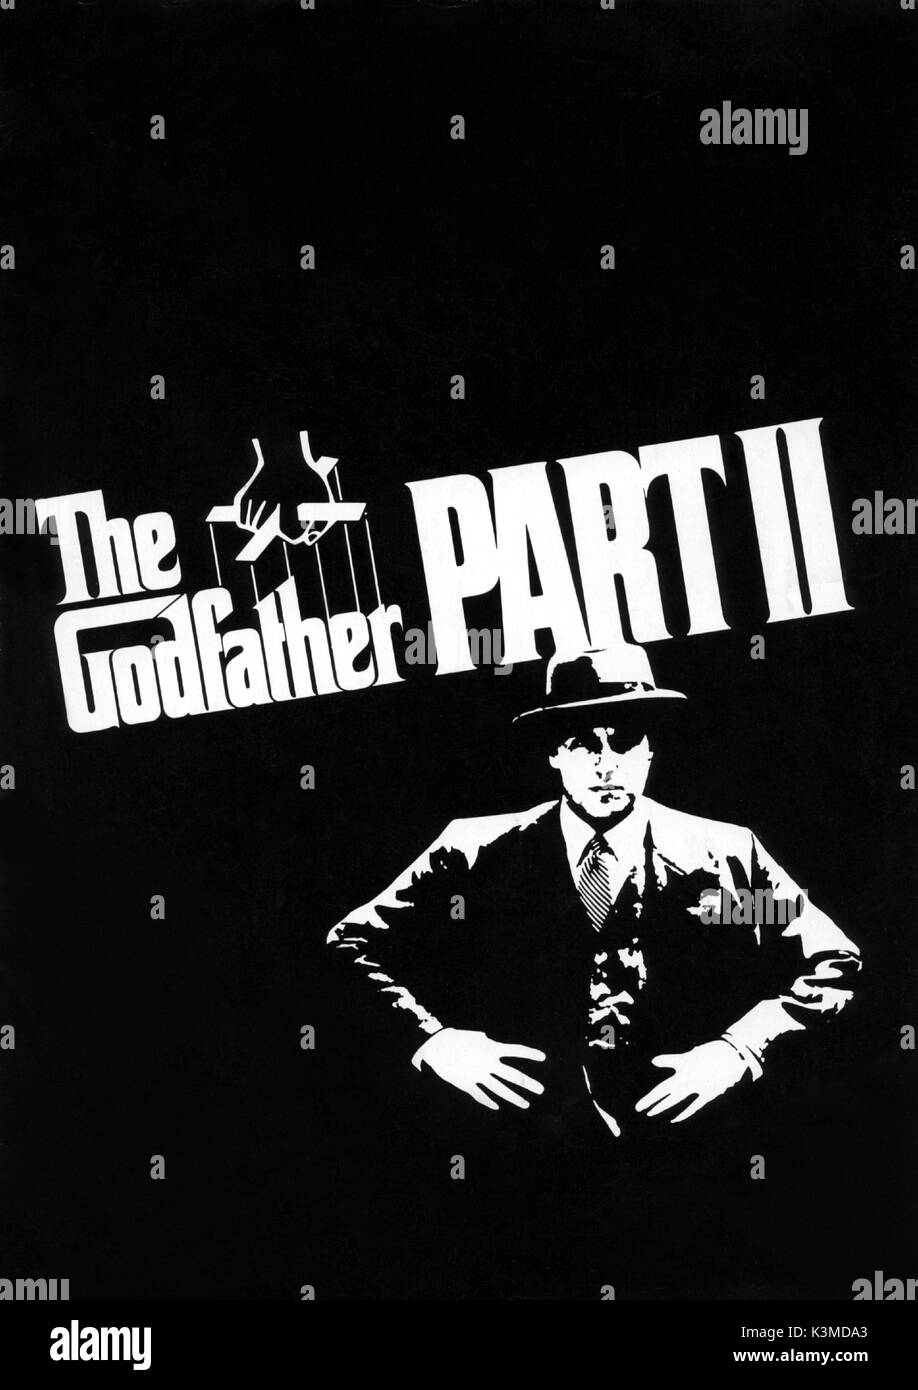 THE GODFATHER: PART 2 [US 1974] AL PACINO     Date: 1974 Stock Photo